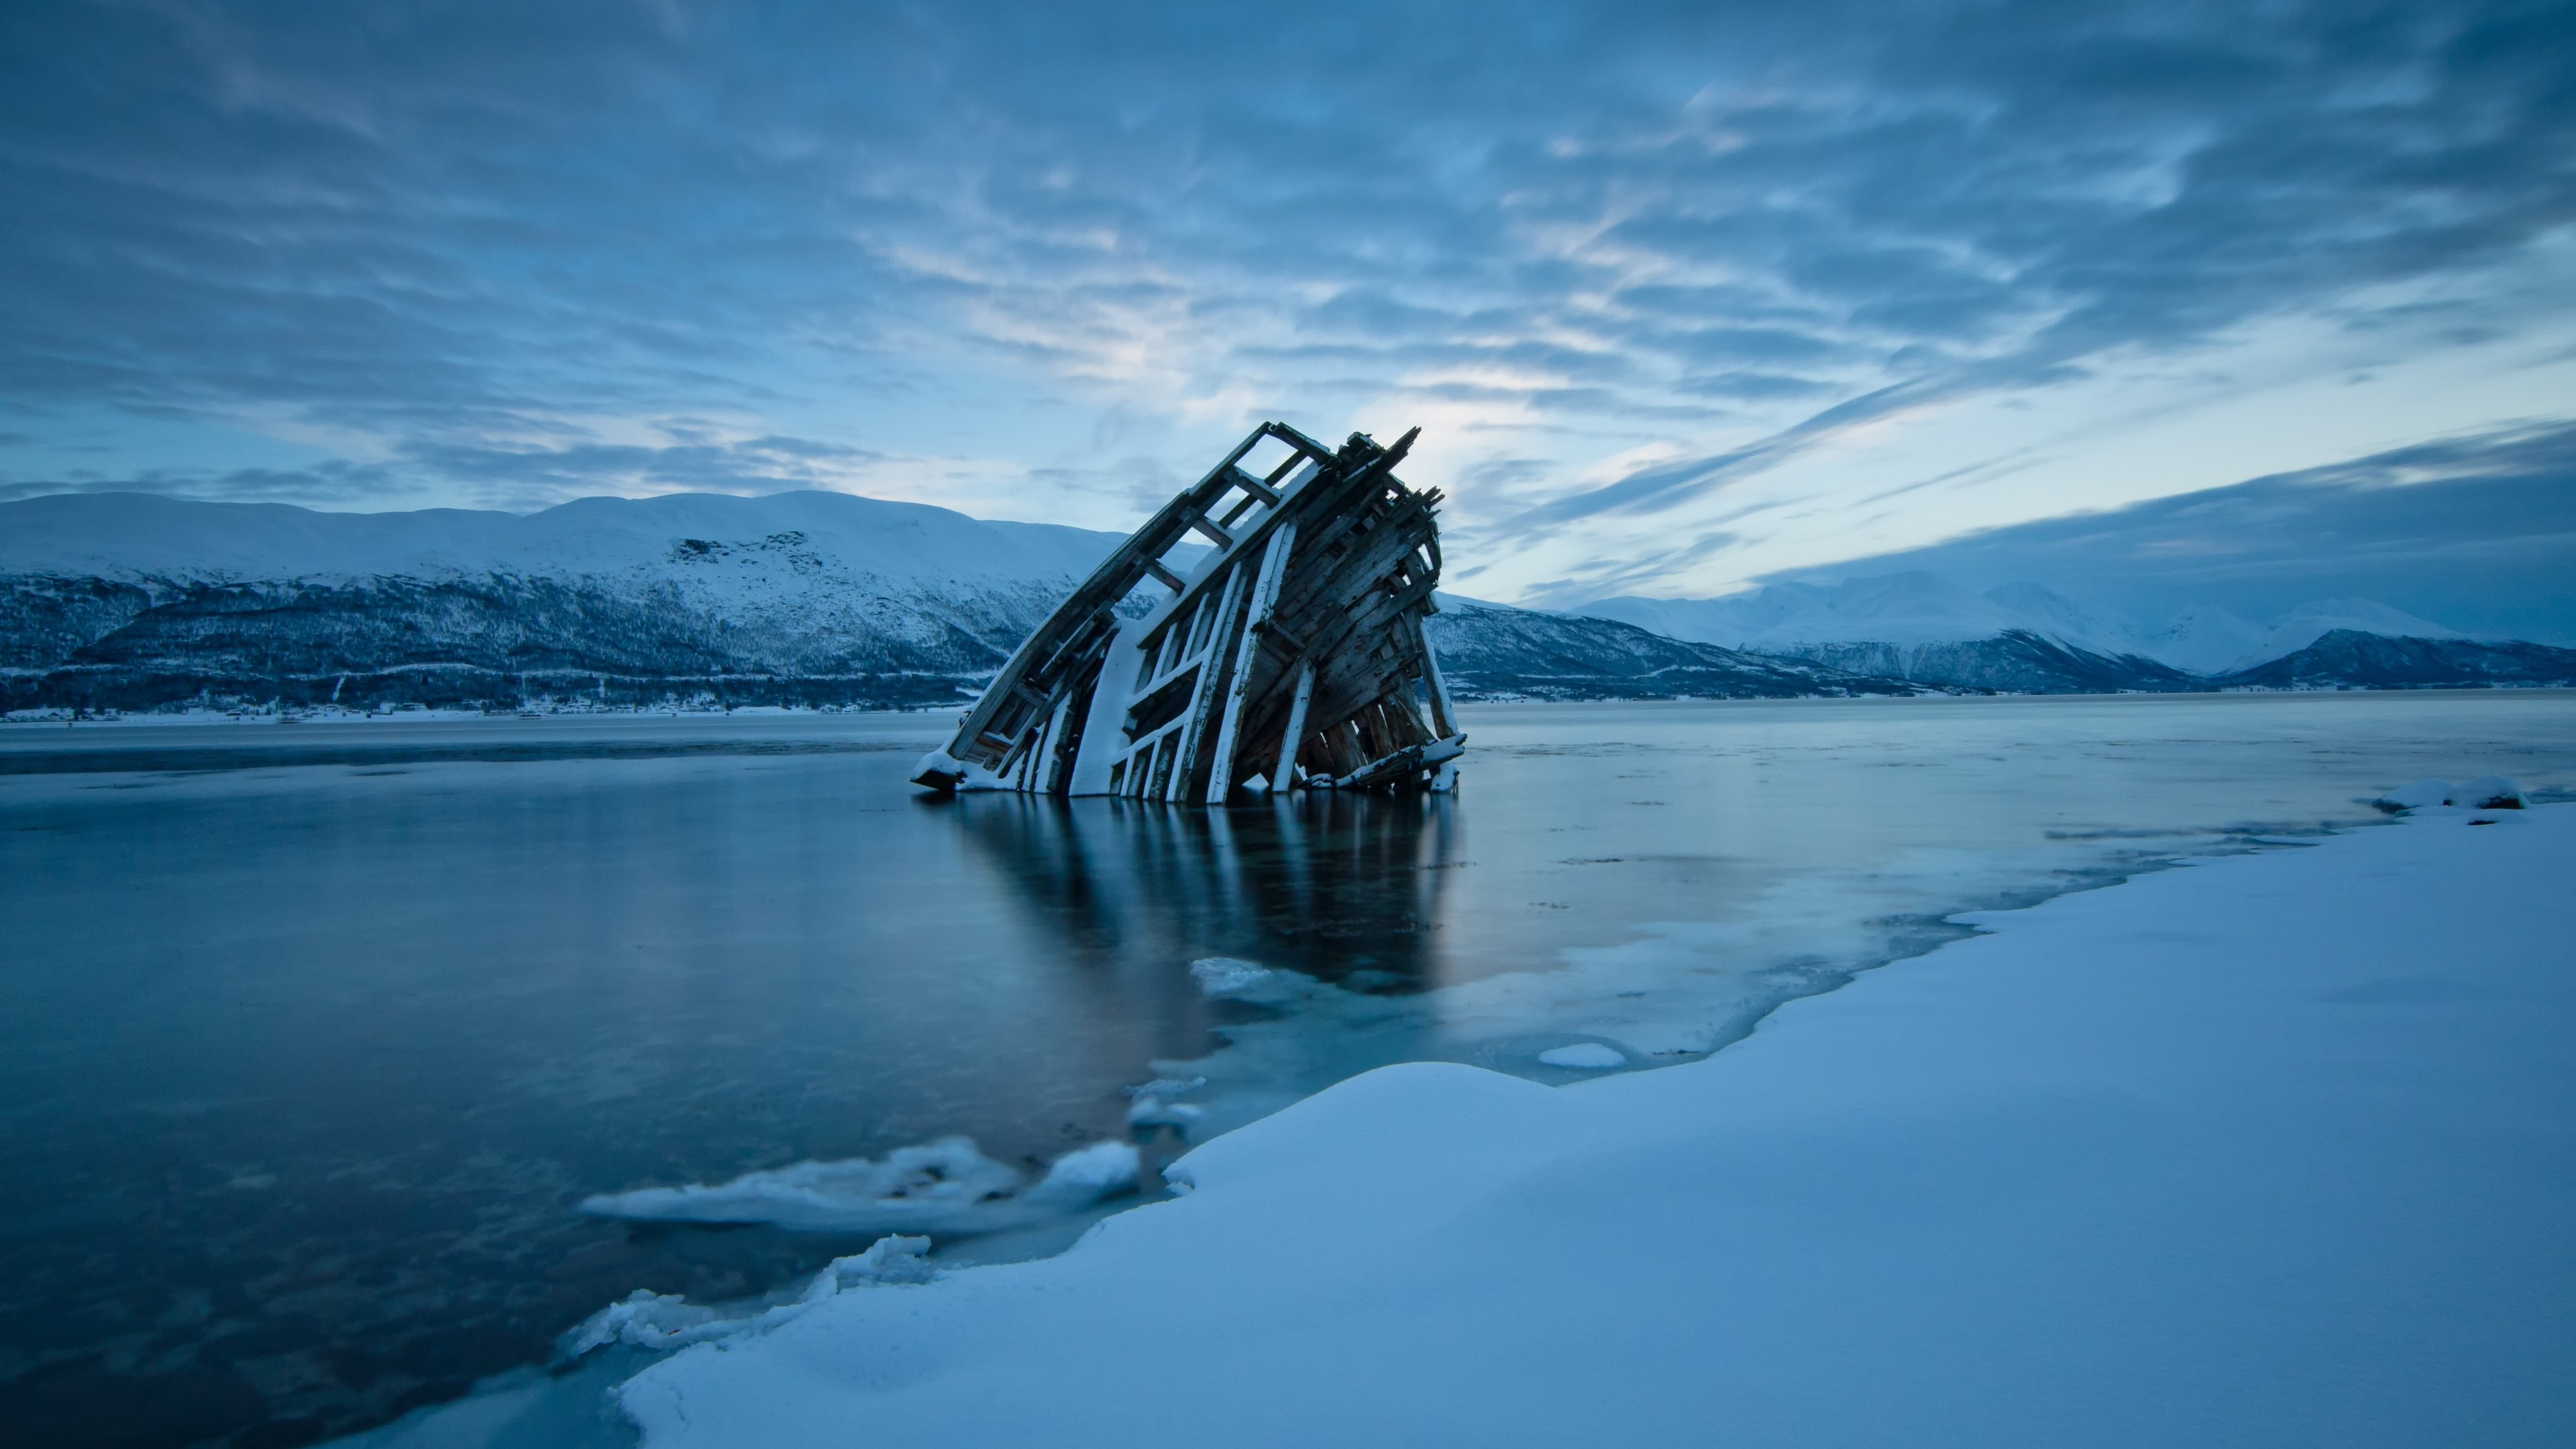 Nature Landscape Clouds Shipwreck Winter Mountains Snow Water Frozen River Frost Ice Norway Evening  3840x2160